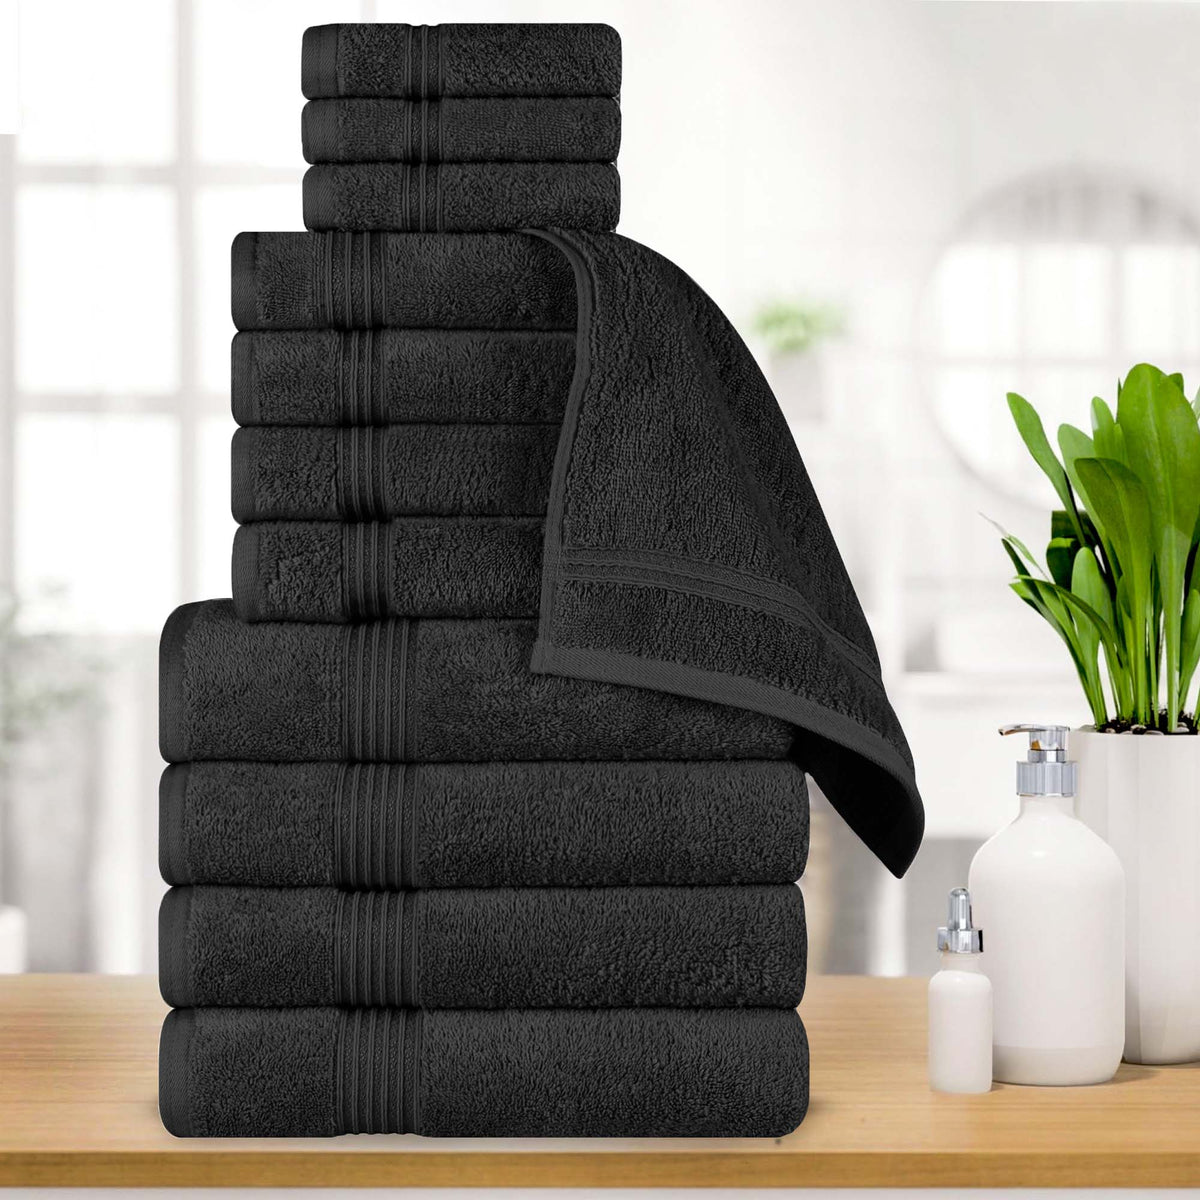 Egyptian Cotton Highly Absorbent Solid 12 Piece Ultra Soft Towel Set - Black